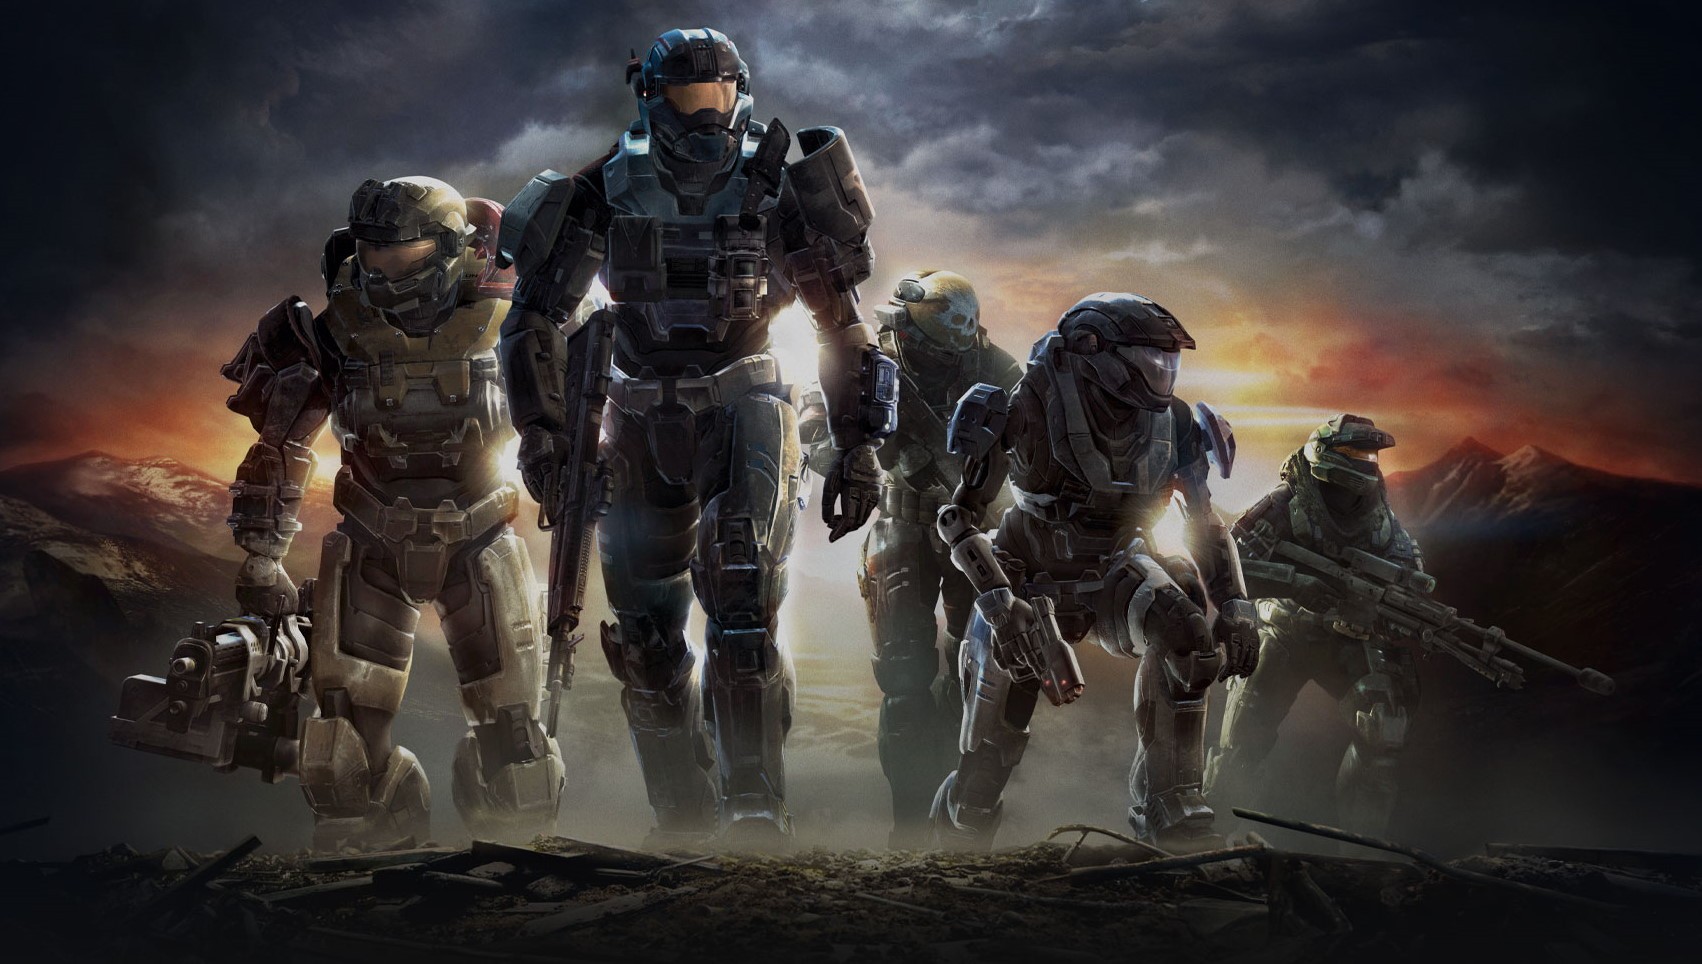 halo master chief collection xbox store